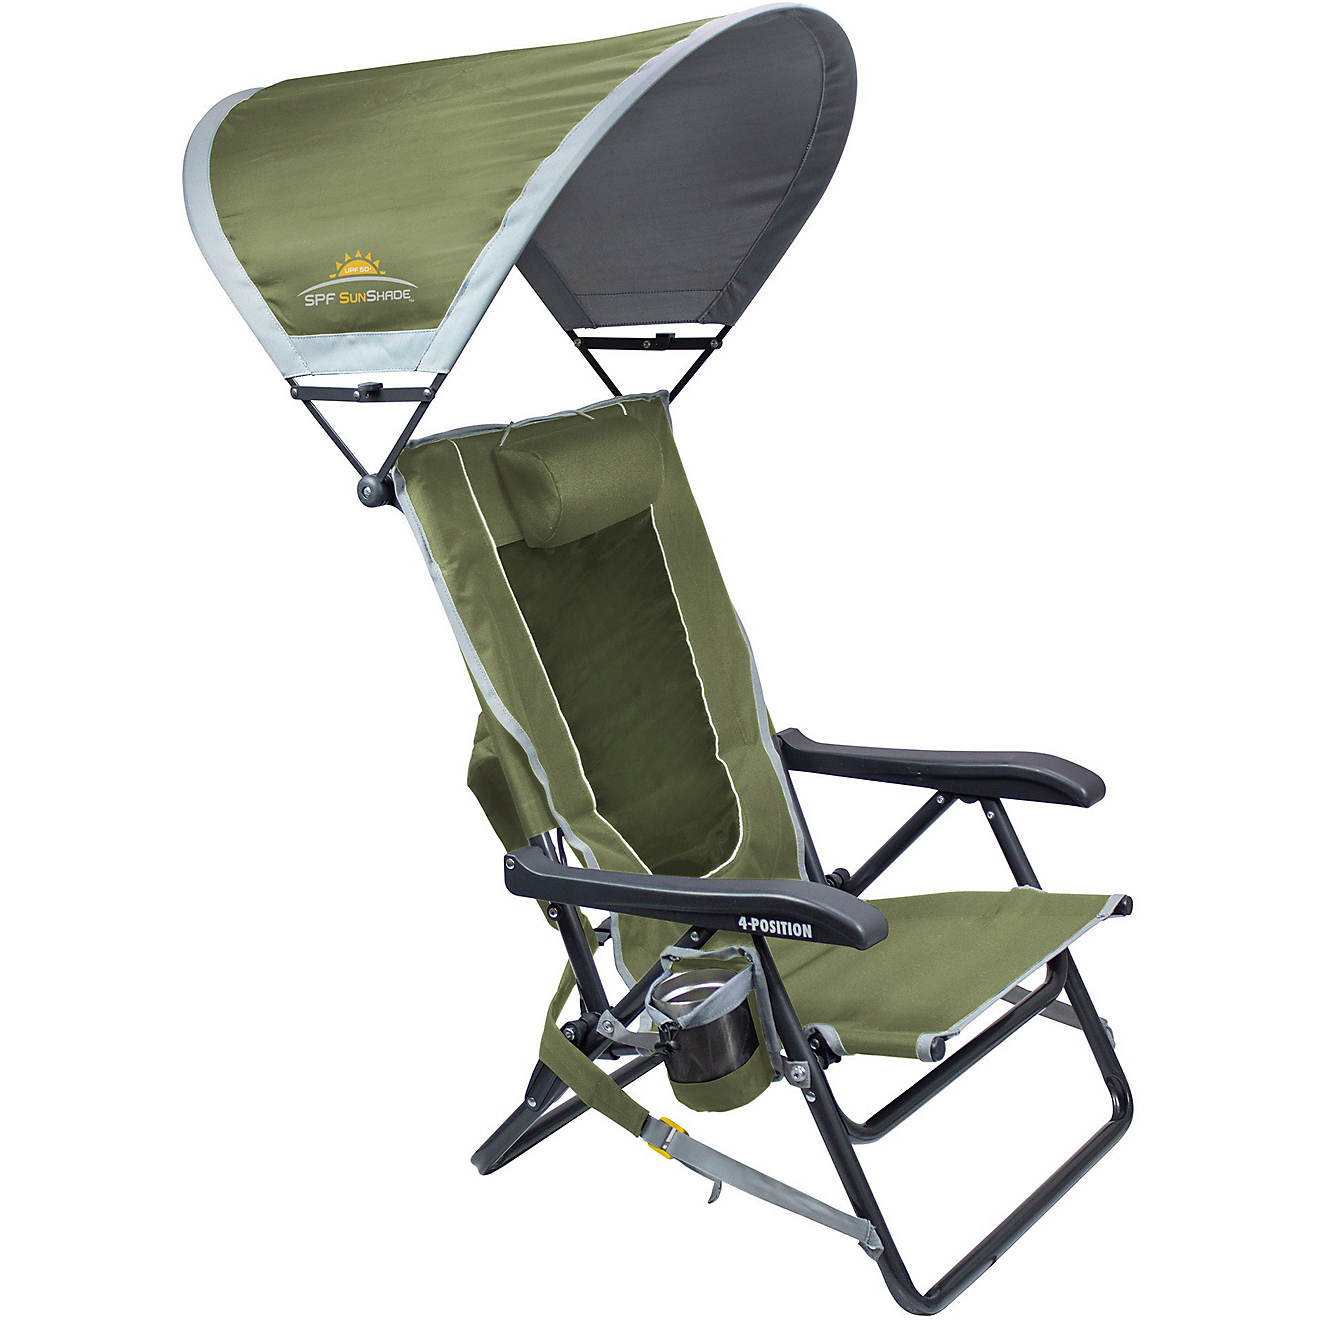 Creatice Hunting Chairs Academy Sports for Living room